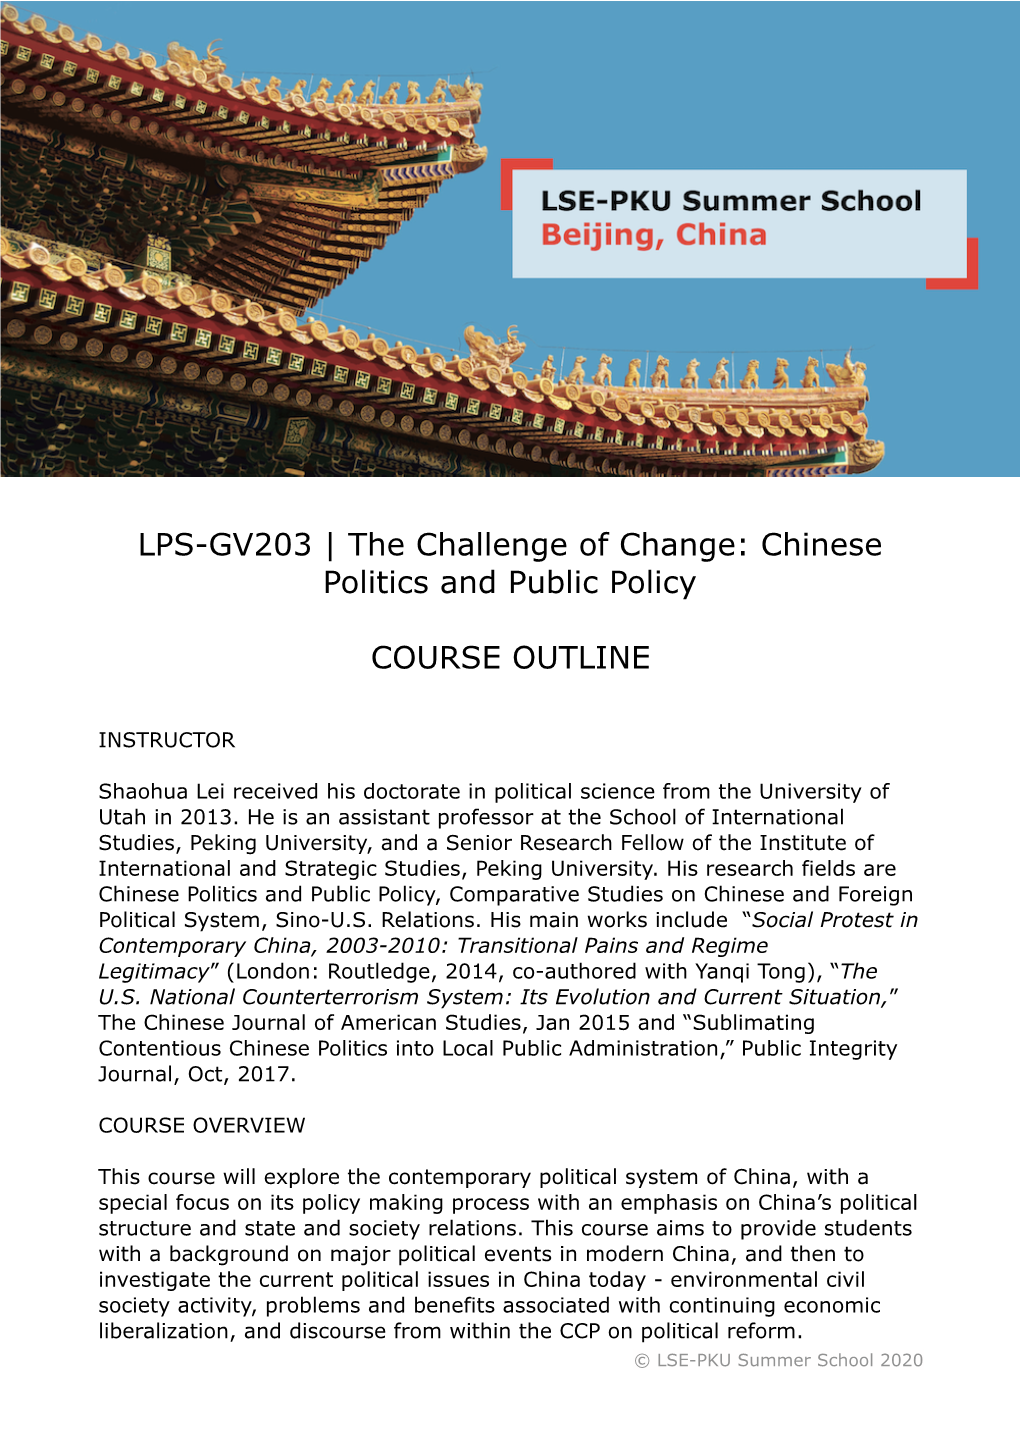 LPS-GV203 | the Challenge of Change- Chinese Politics and Public Policy